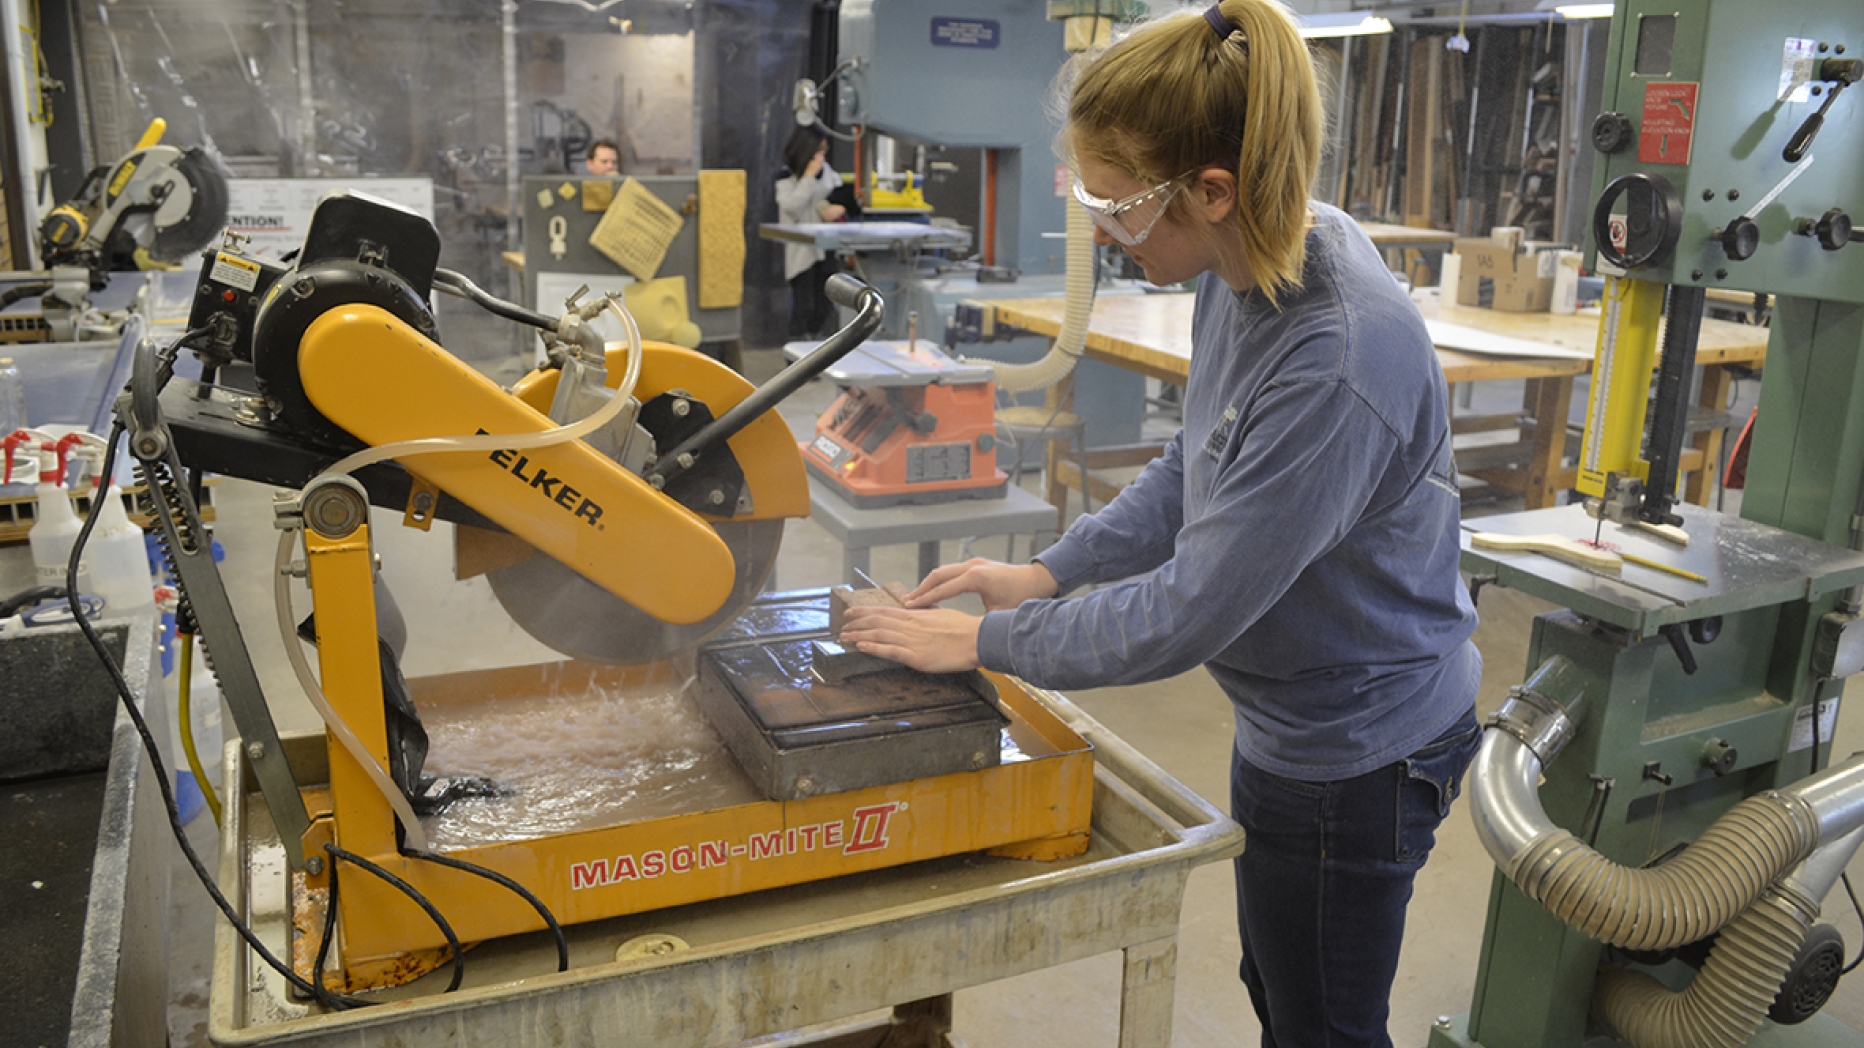 Student working with a piece of heavy cutting machinery.